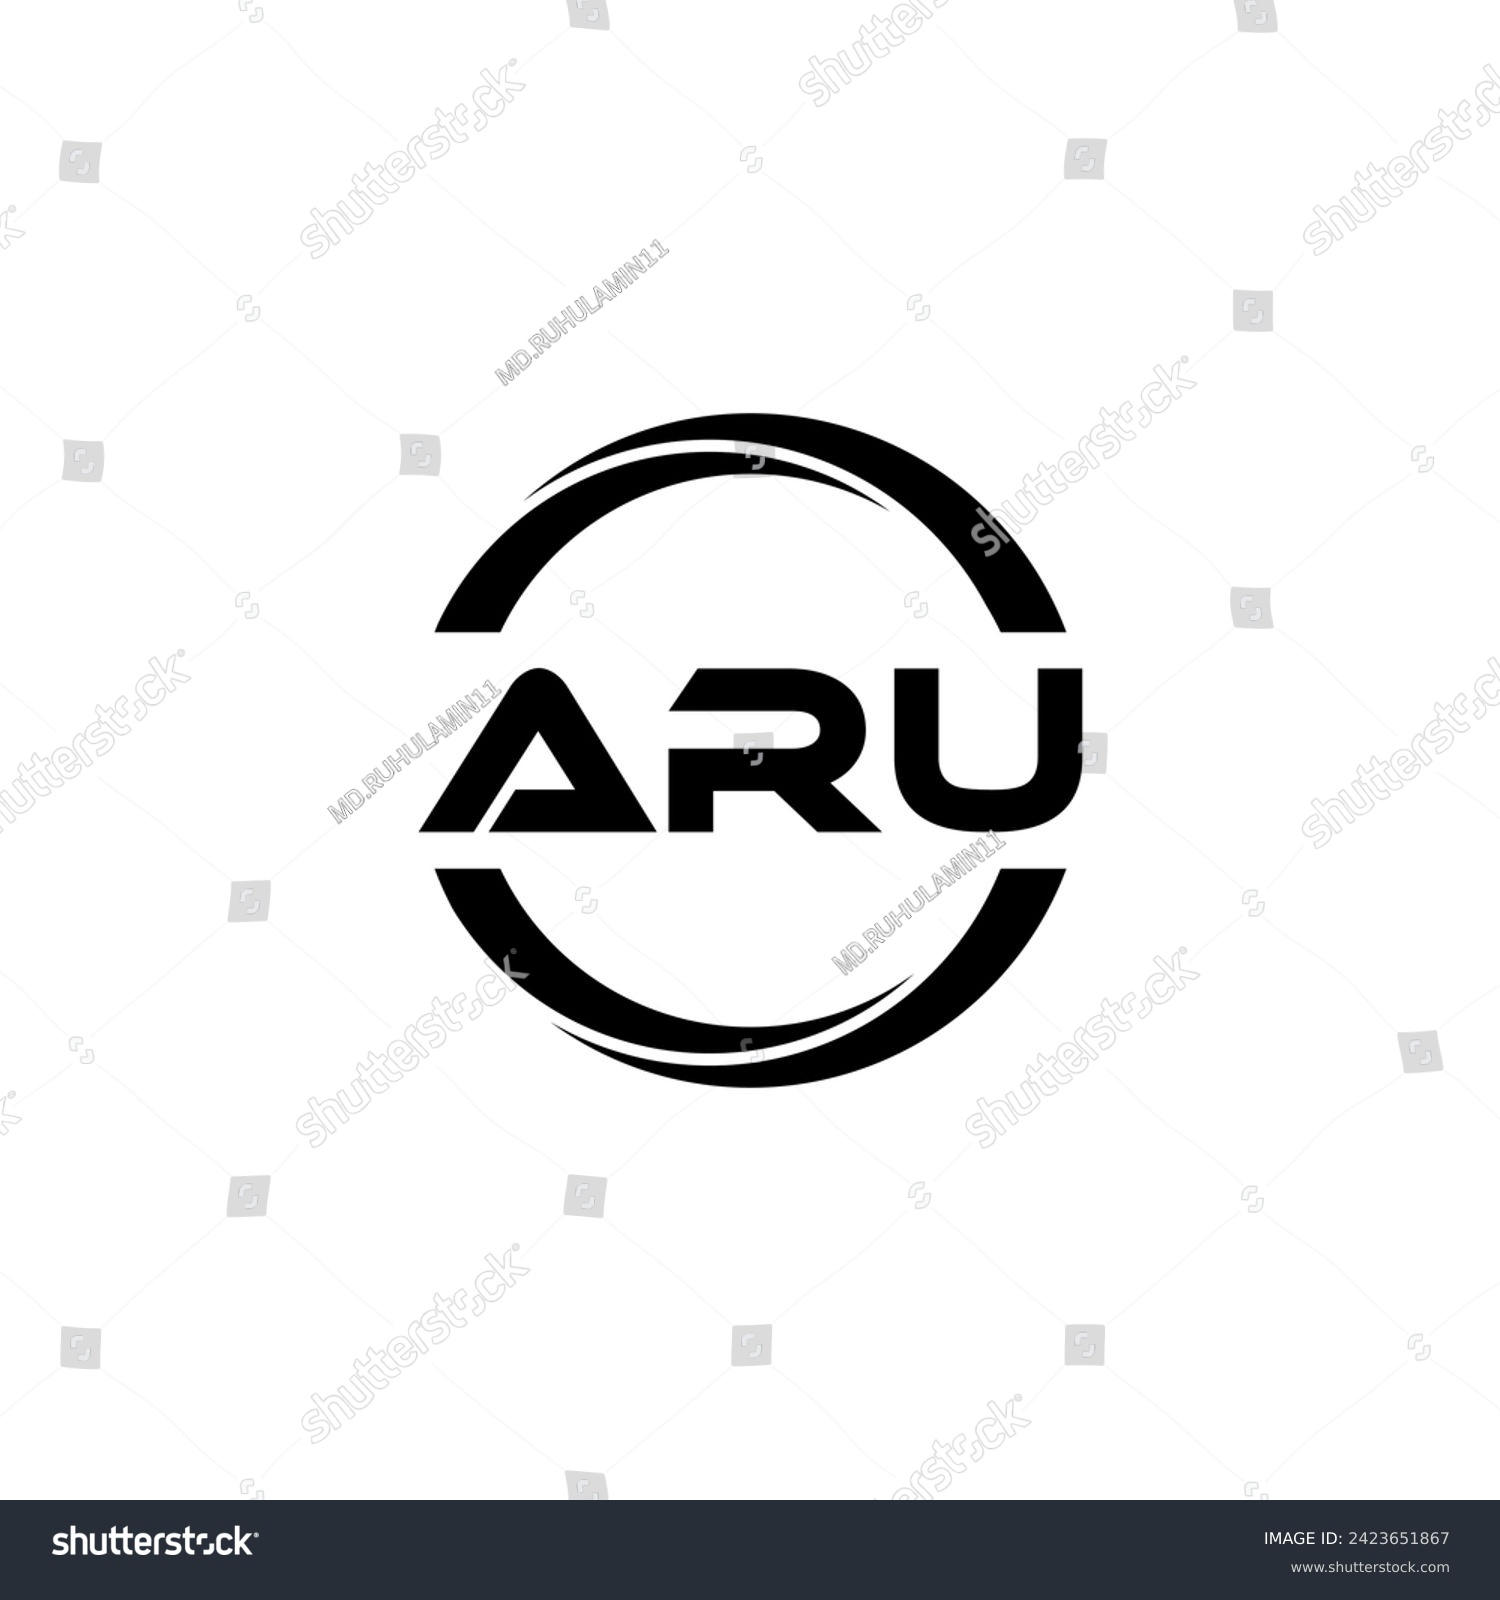 SVG of ARU Letter Logo Design, Inspiration for a Unique Identity. Modern Elegance and Creative Design. Watermark Your Success with the Striking this Logo. svg